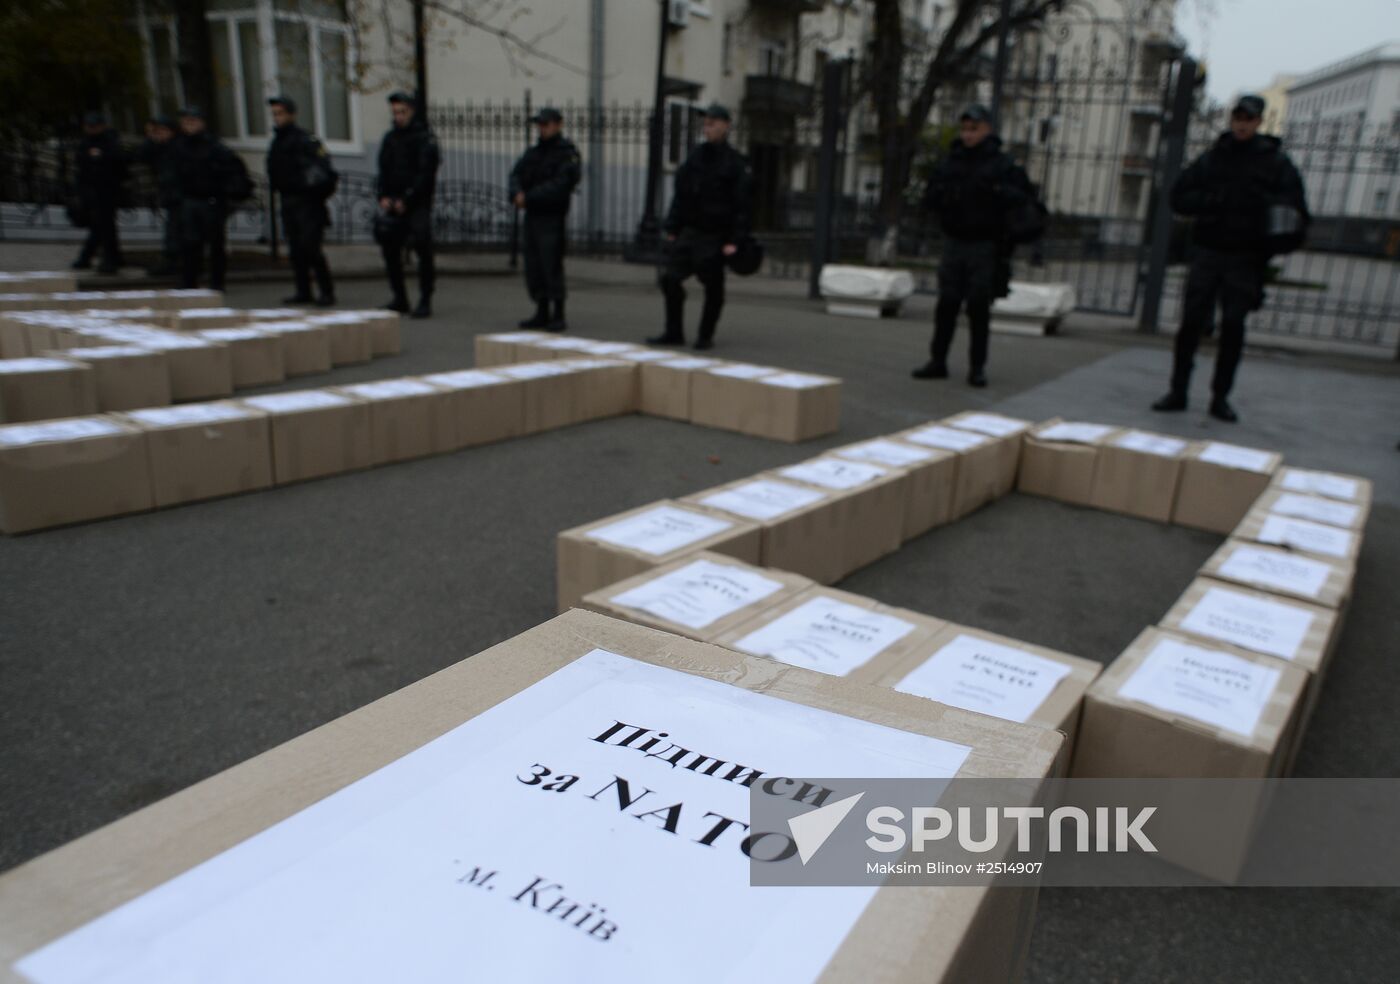 Batkivshchyna Party presents 3 million signatures in support of referendum on Ukraine's accession to NATO